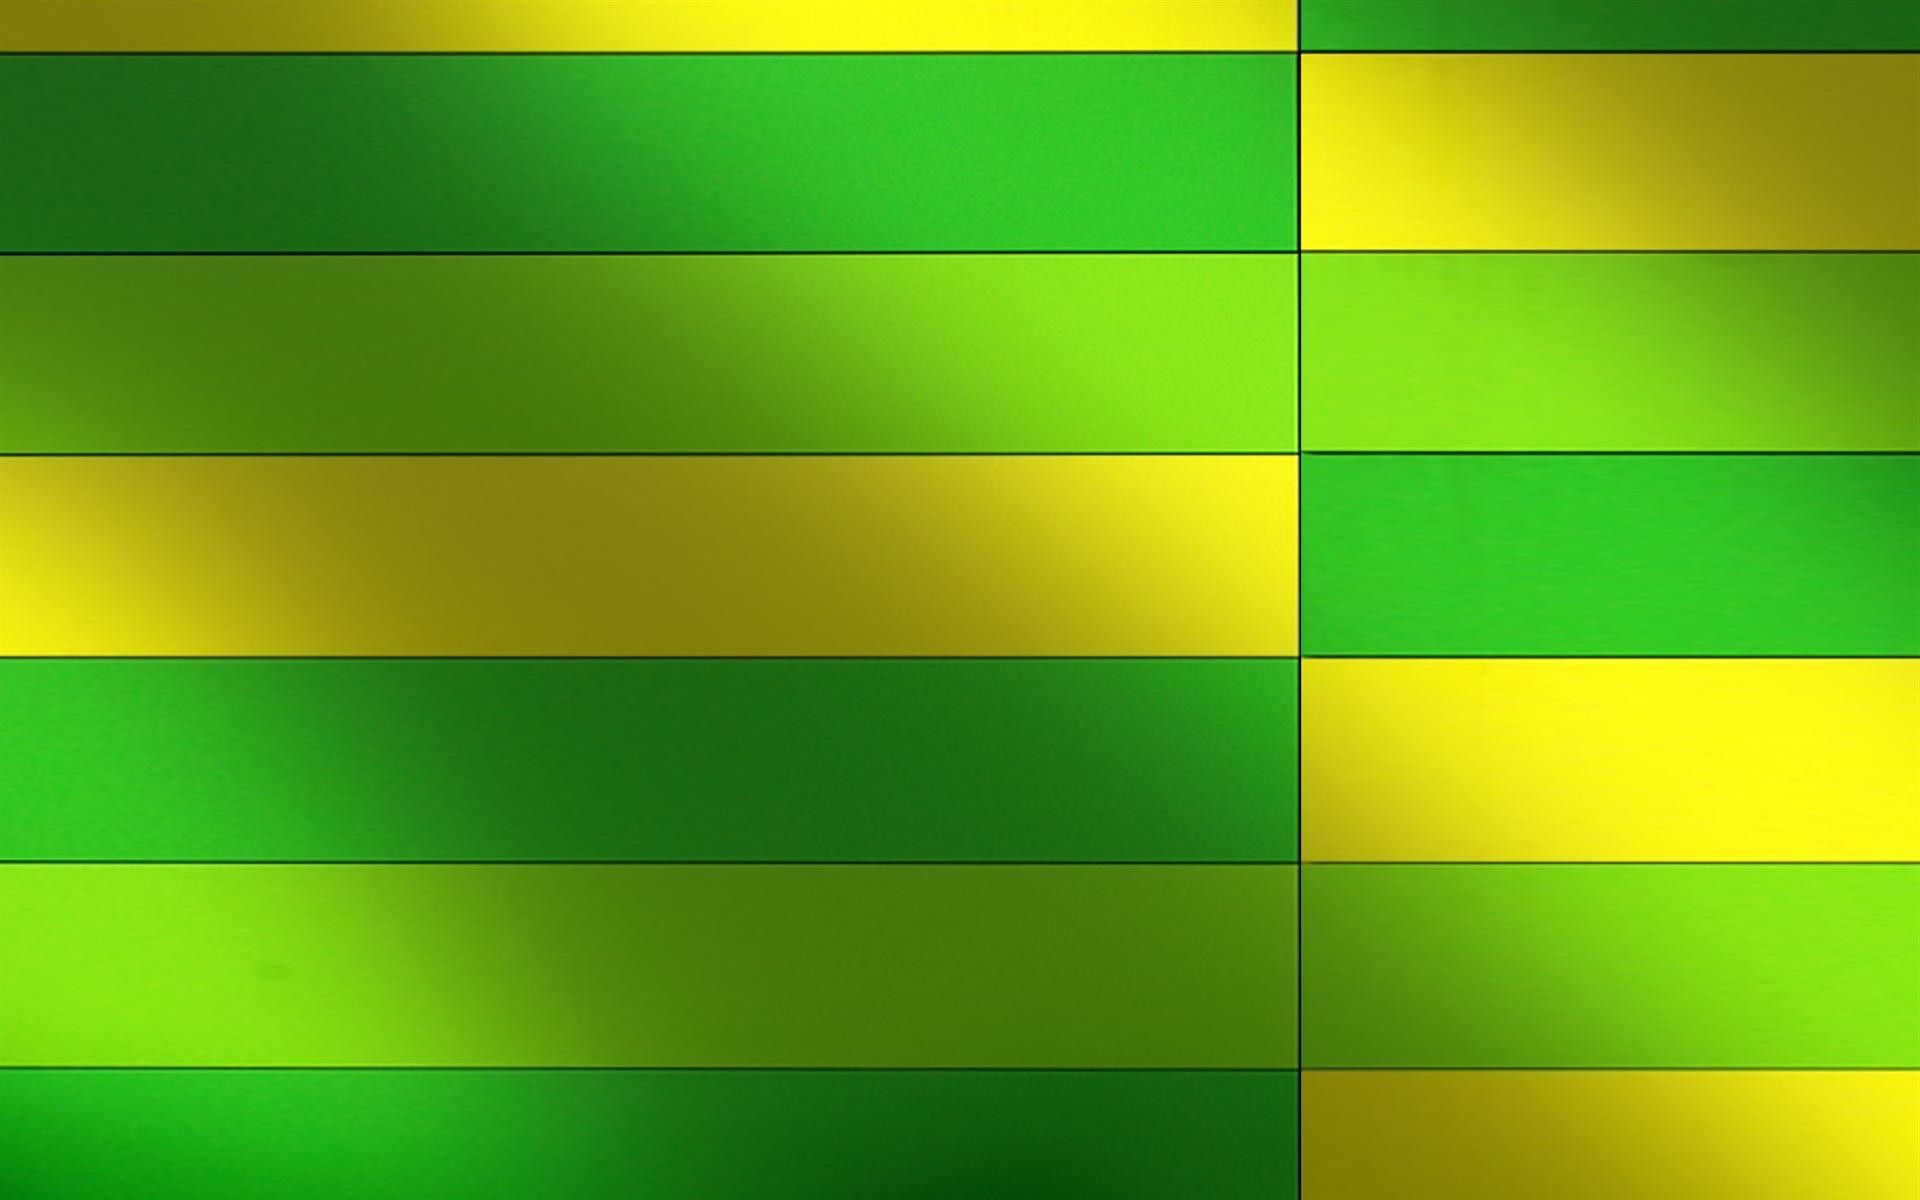 background green and yellow